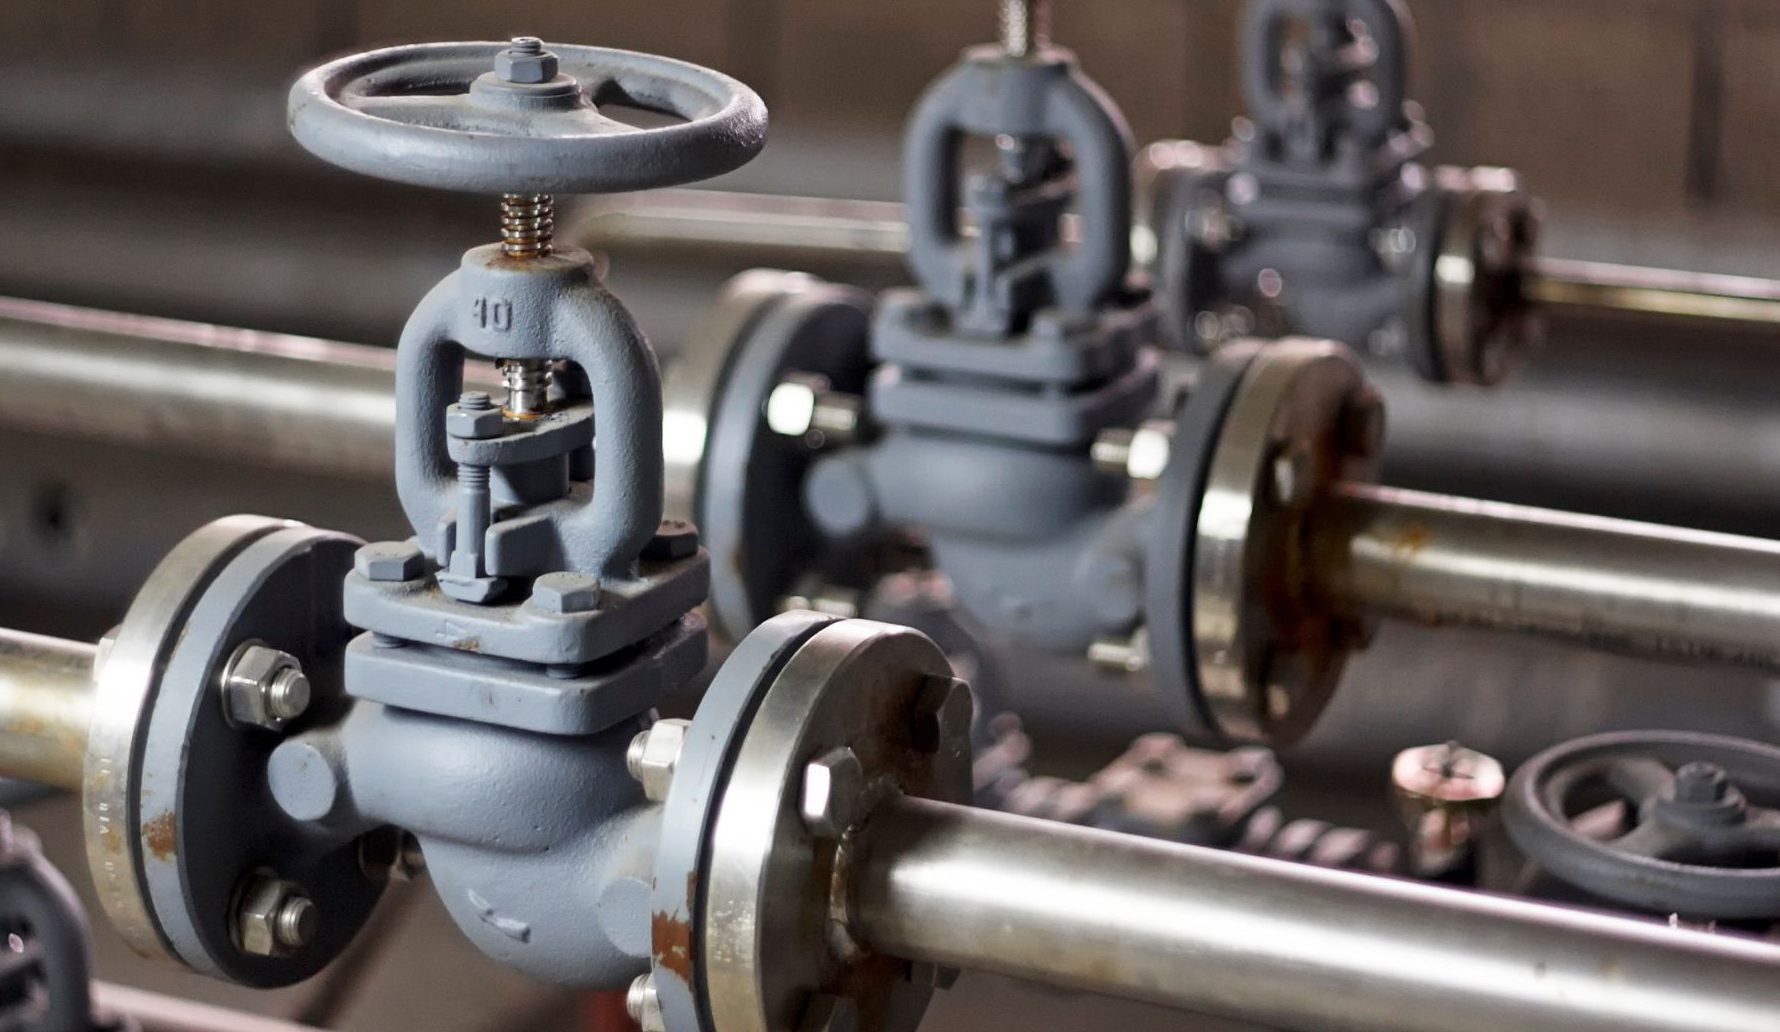 Global Vacuum Valve Market Overview And Prospects – Includes Vacuum Valve Market Trends